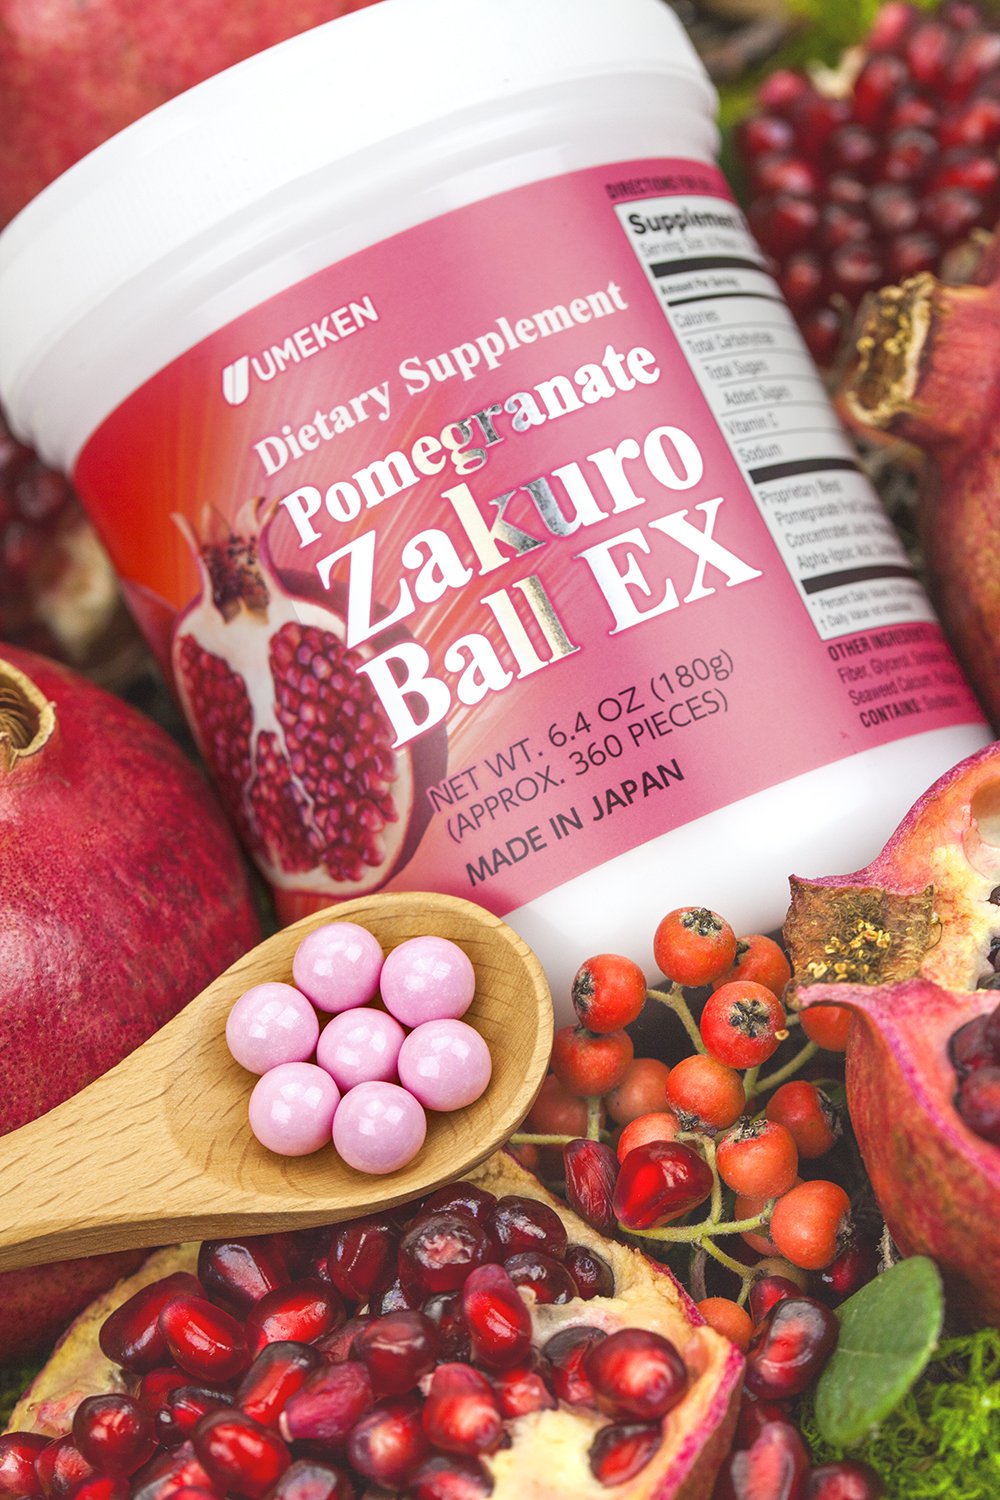 Umeken Pomegranate Extract Zakuro Balls - 360 Pieces (2 Month Supply), Pack of 2 Bottles, Chewable Supplement with Natural Vitamins, Minerals, Citric Acids, and Tannins